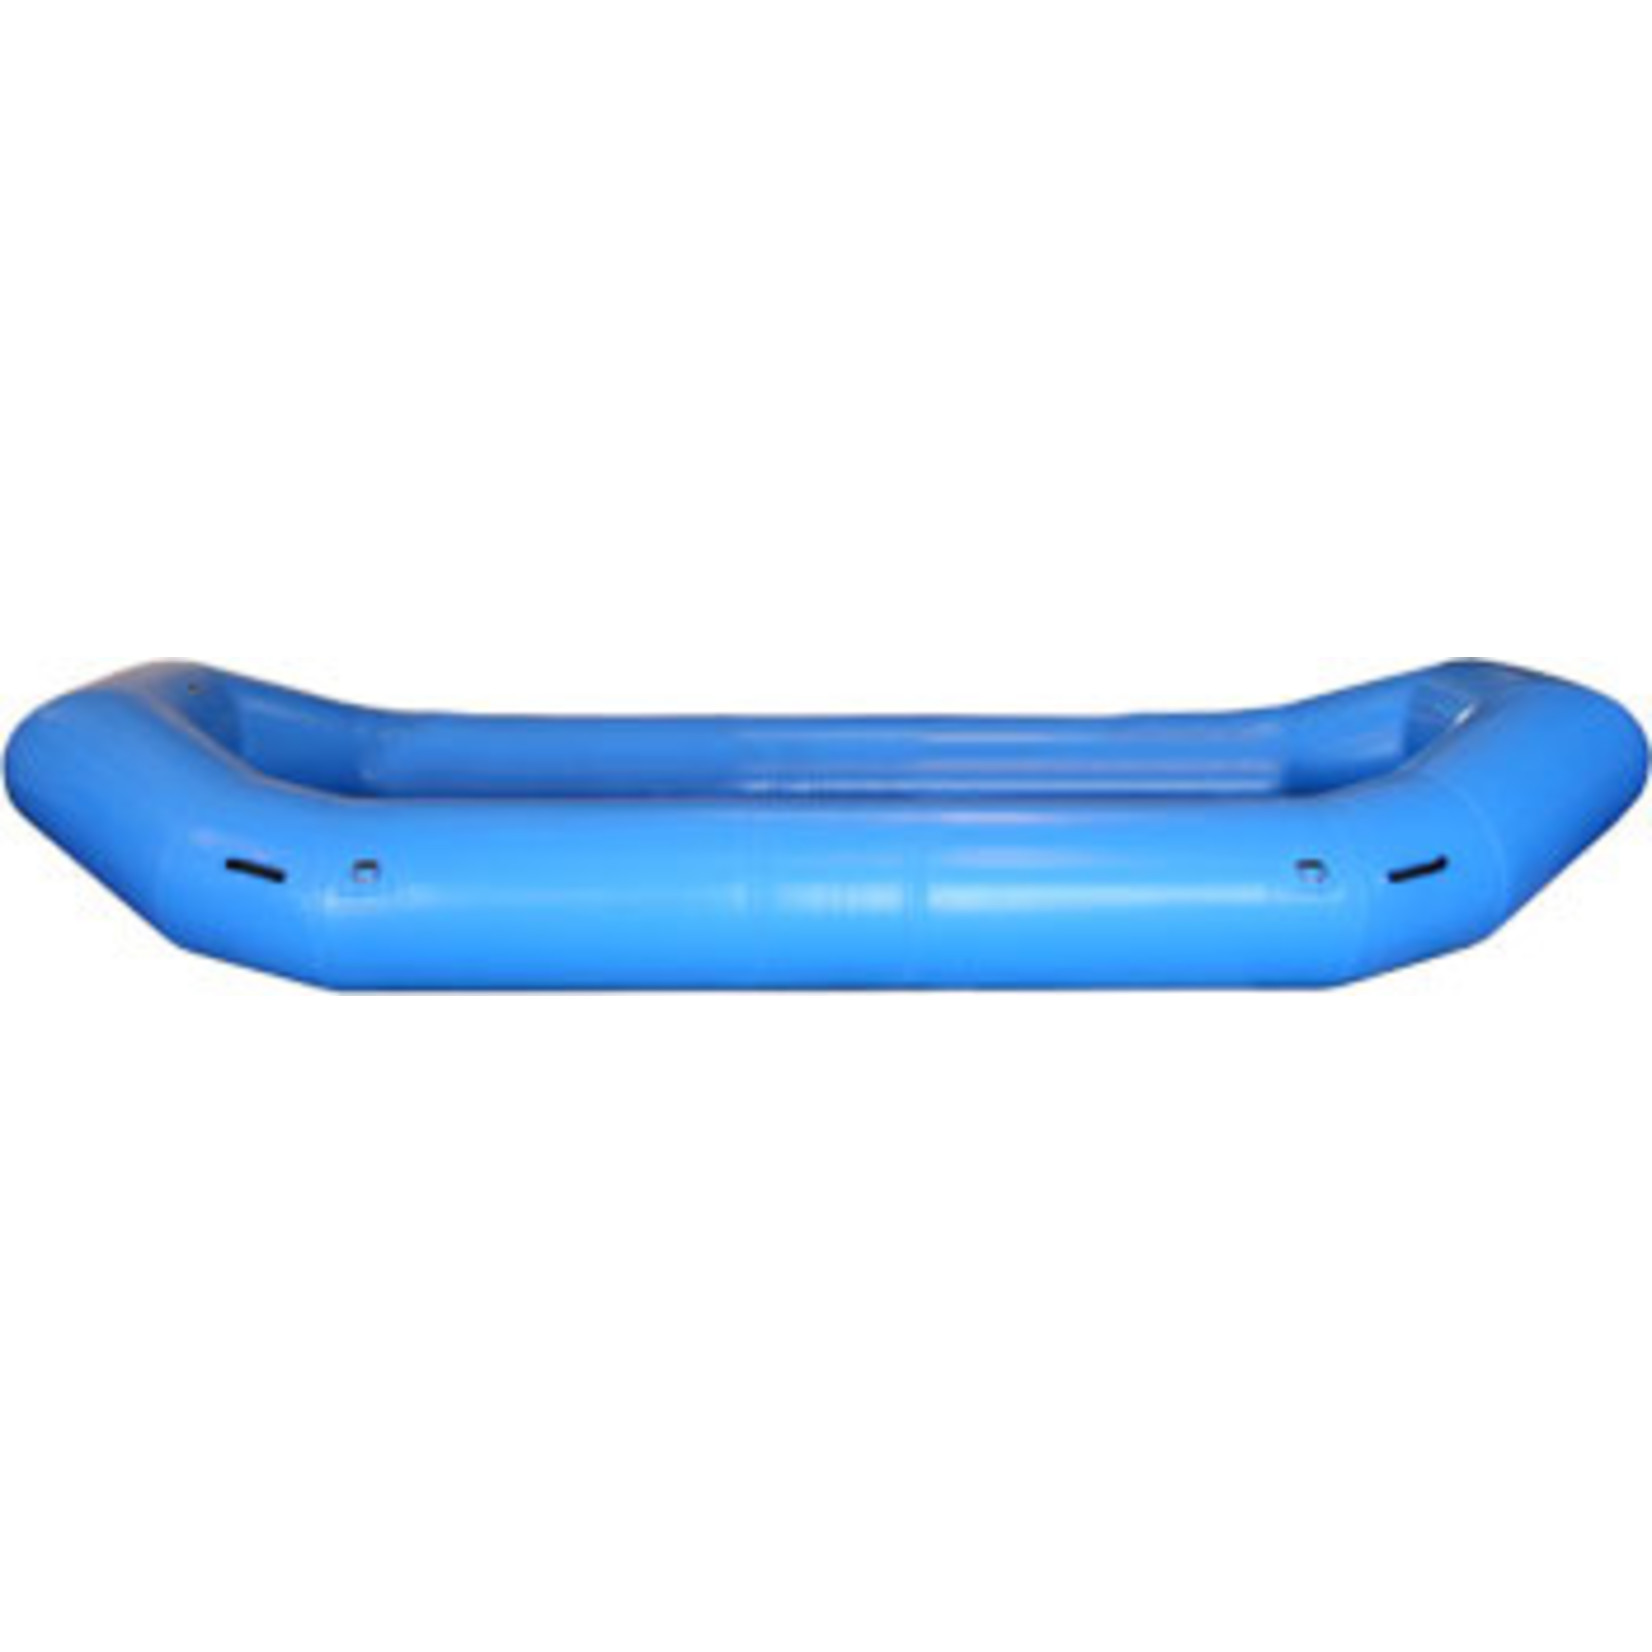 Hyside Inflatables Hyside Pro 15.0